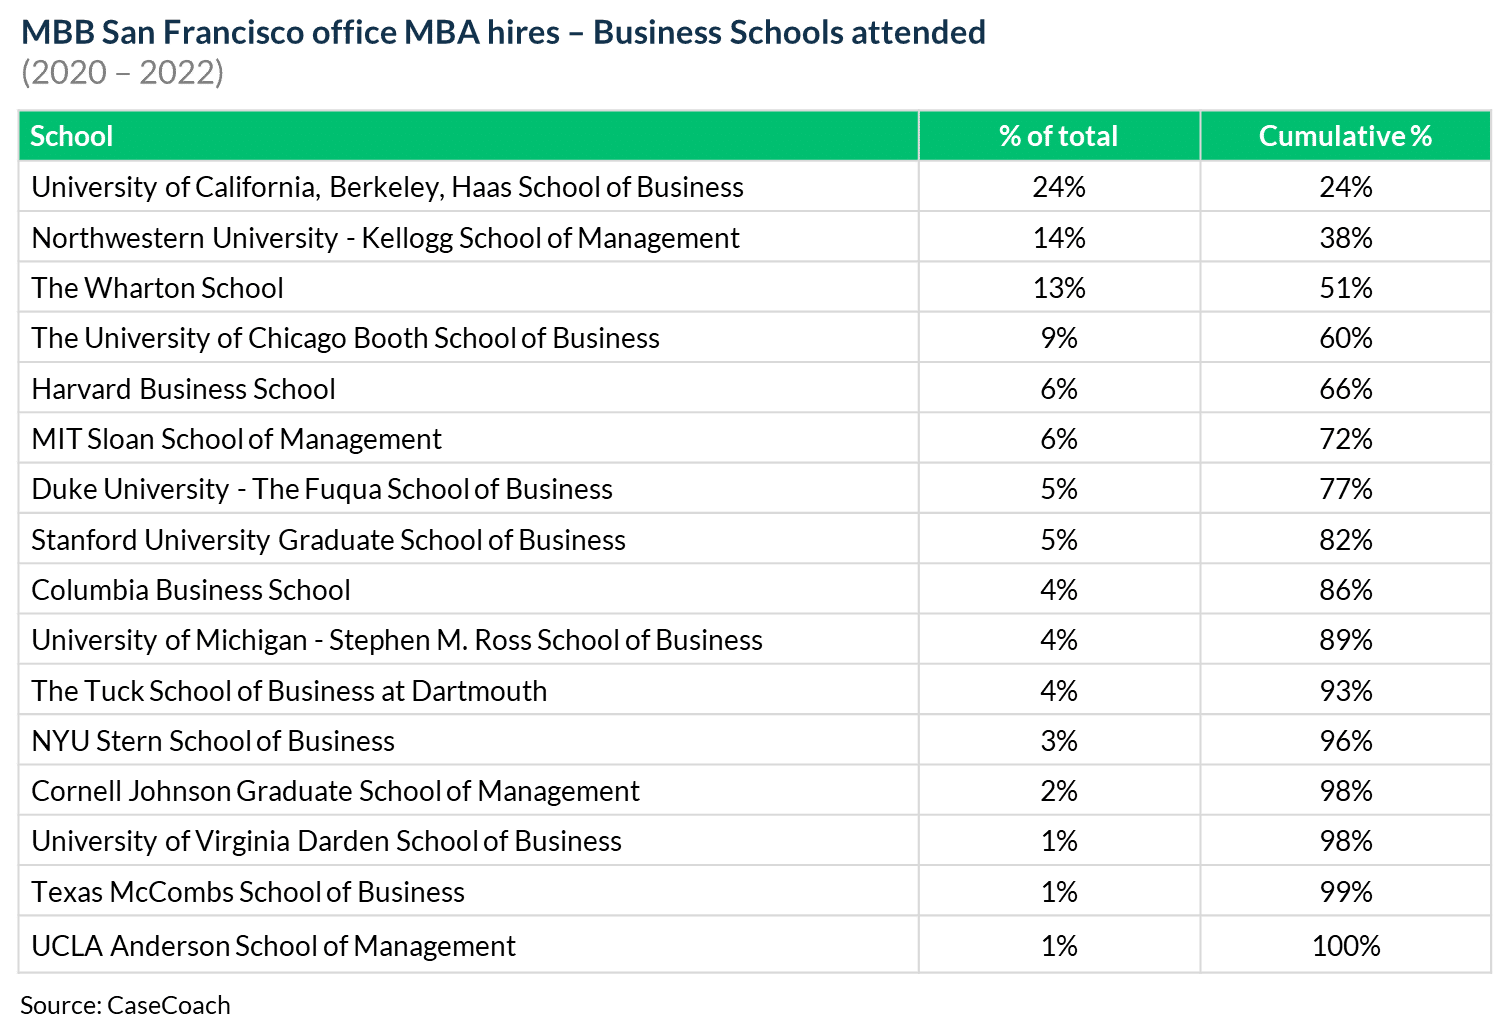 Universities attended by McKinsey, BCG, and Bain's MBA hires in San Francisco offices